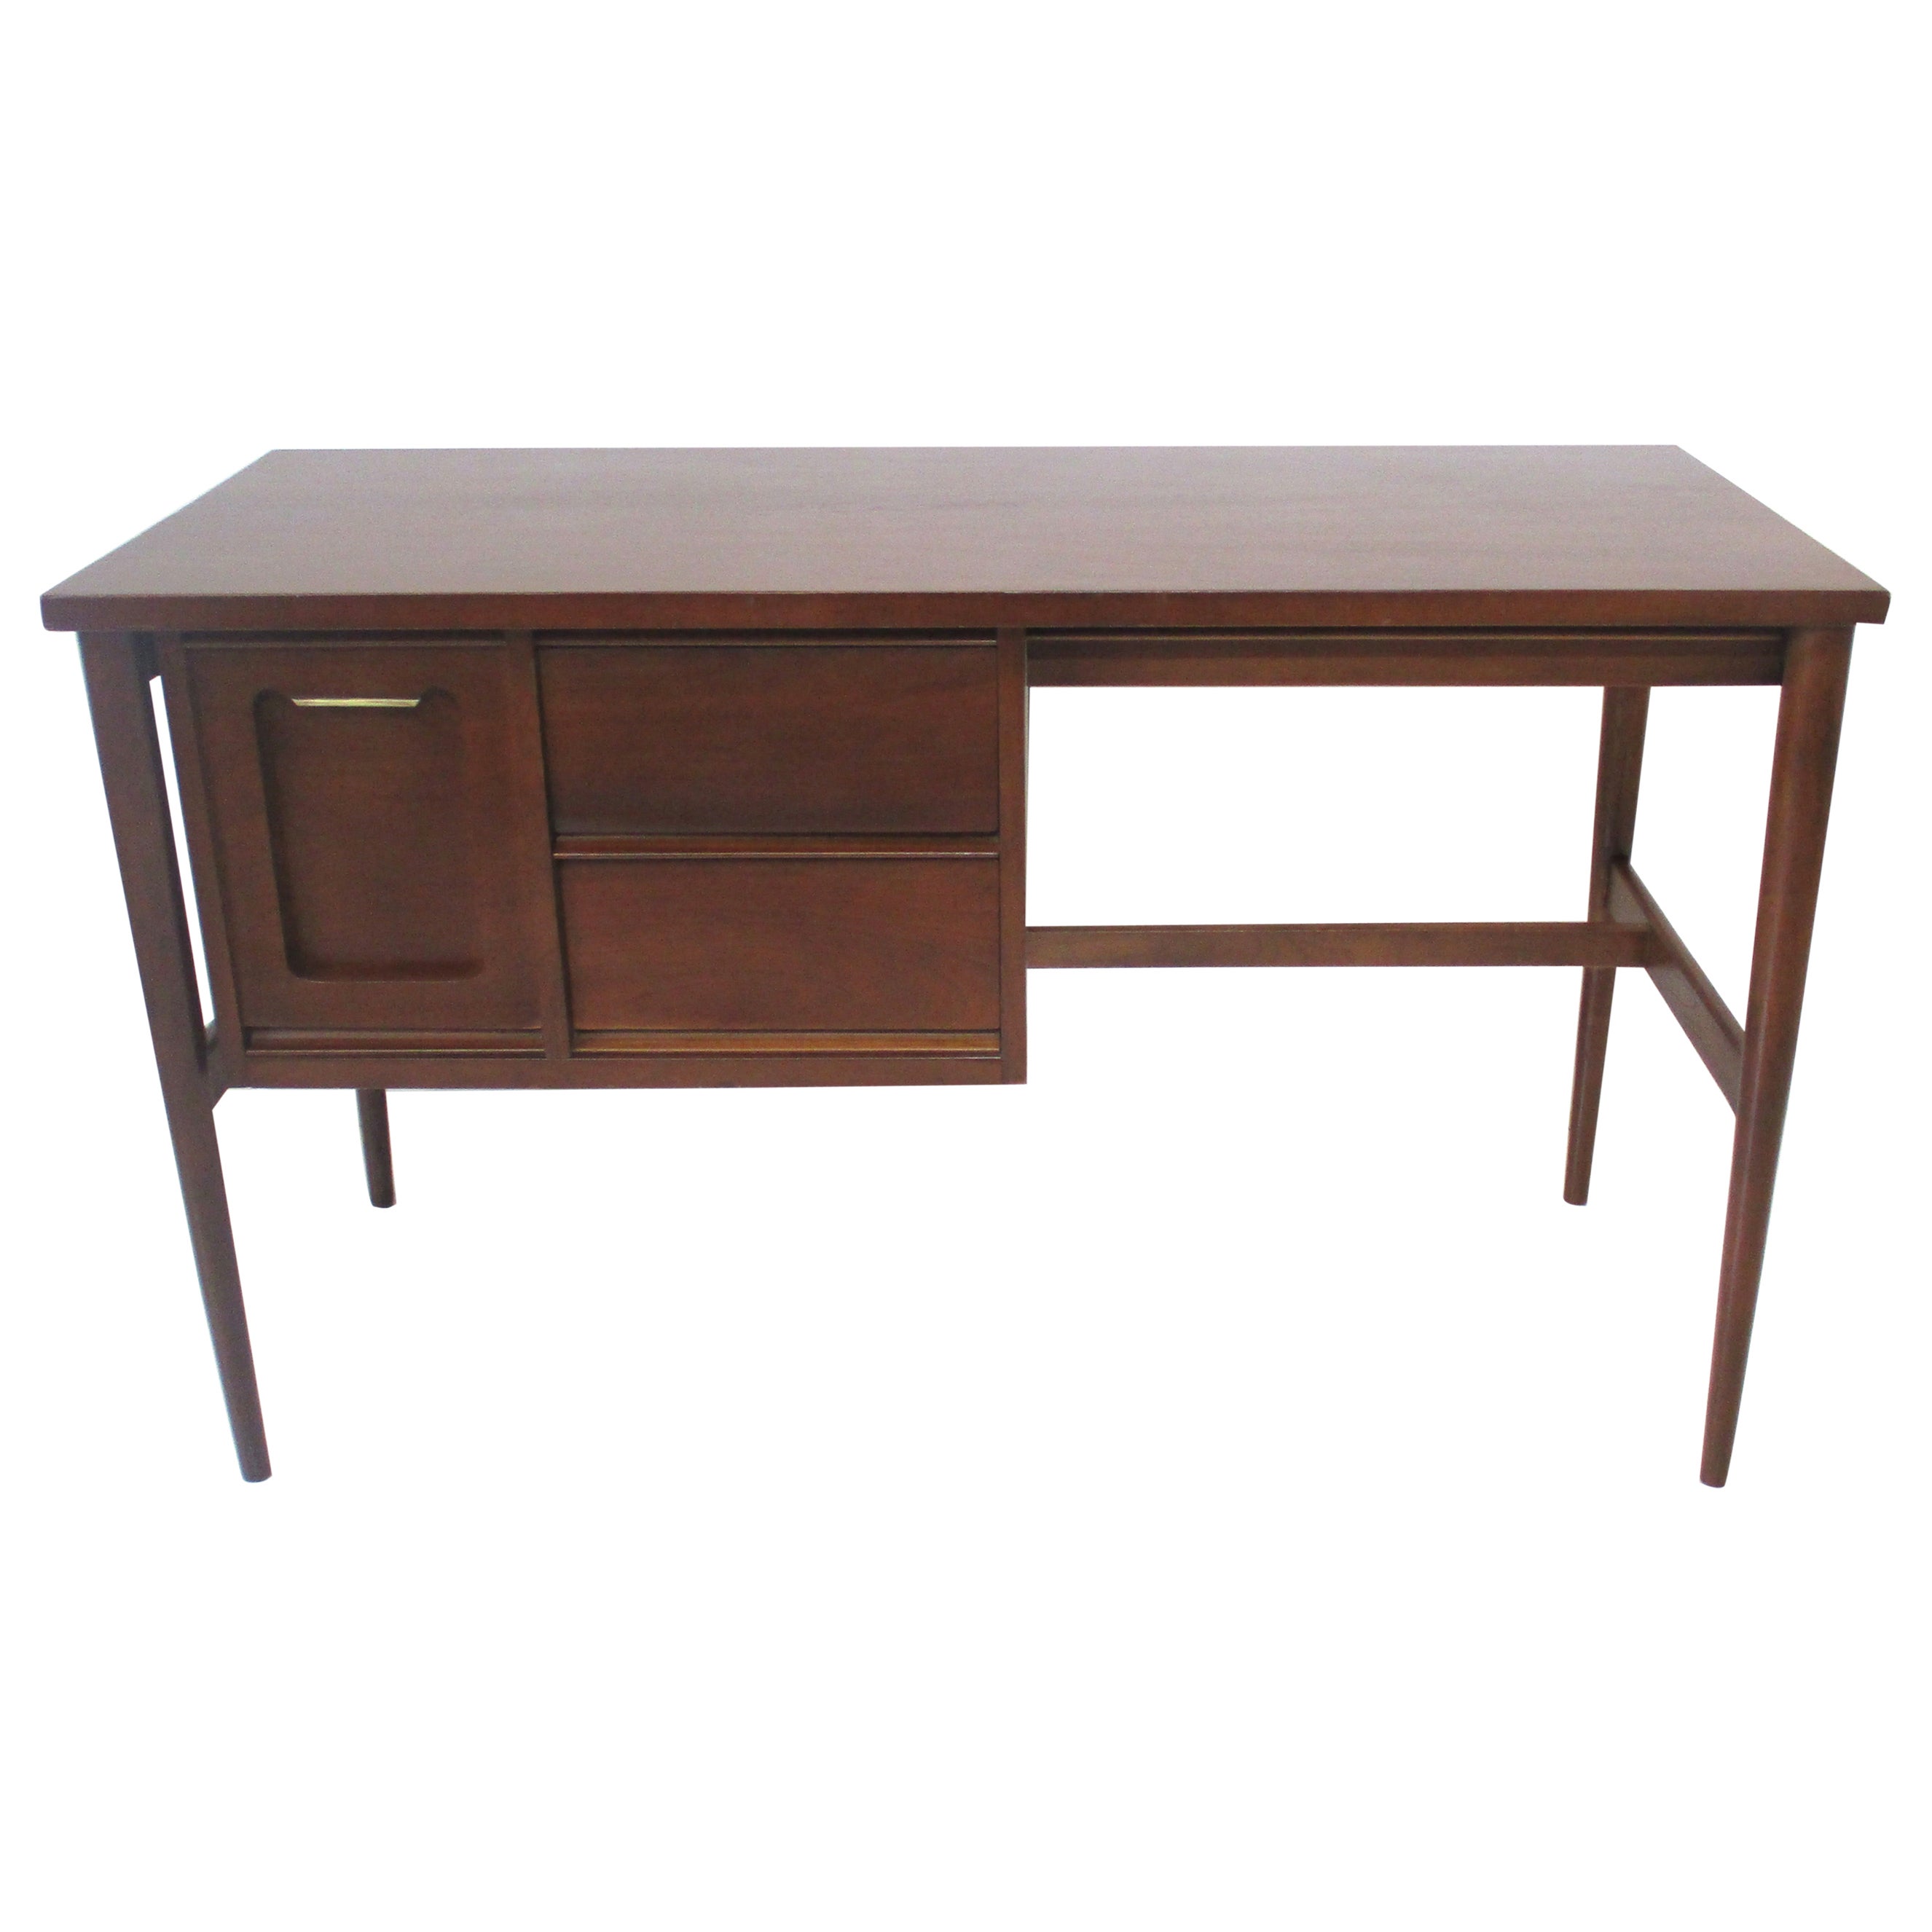 Mid-Century Desk by the Bassett Furniture Co